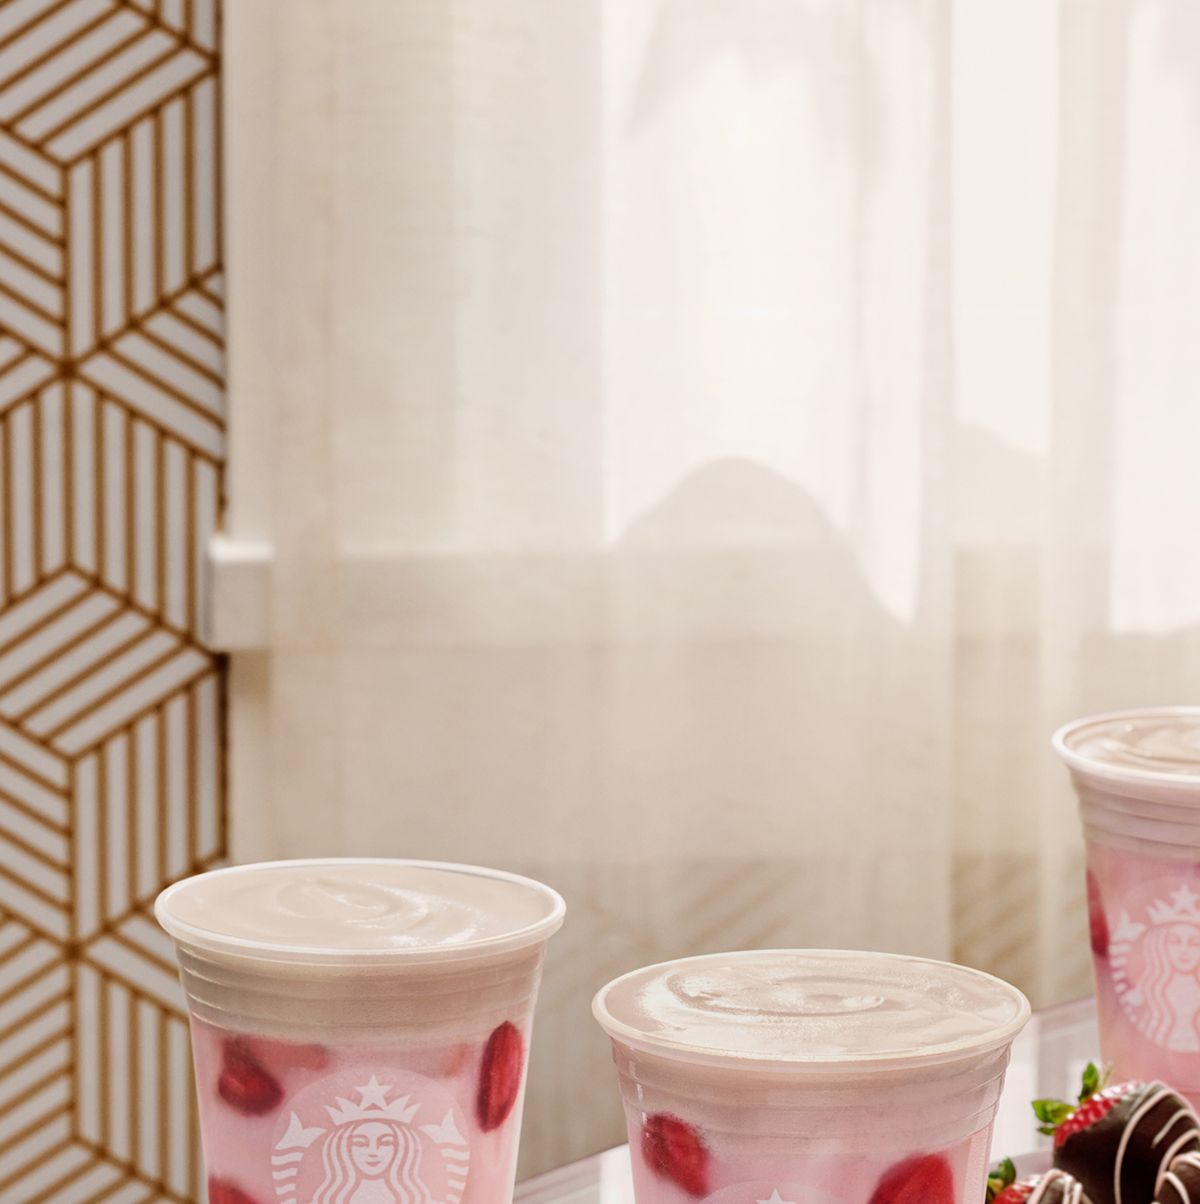 Starbucks' Valentine's Day 2022 Cups Are IG-Worthy Pinks & Reds